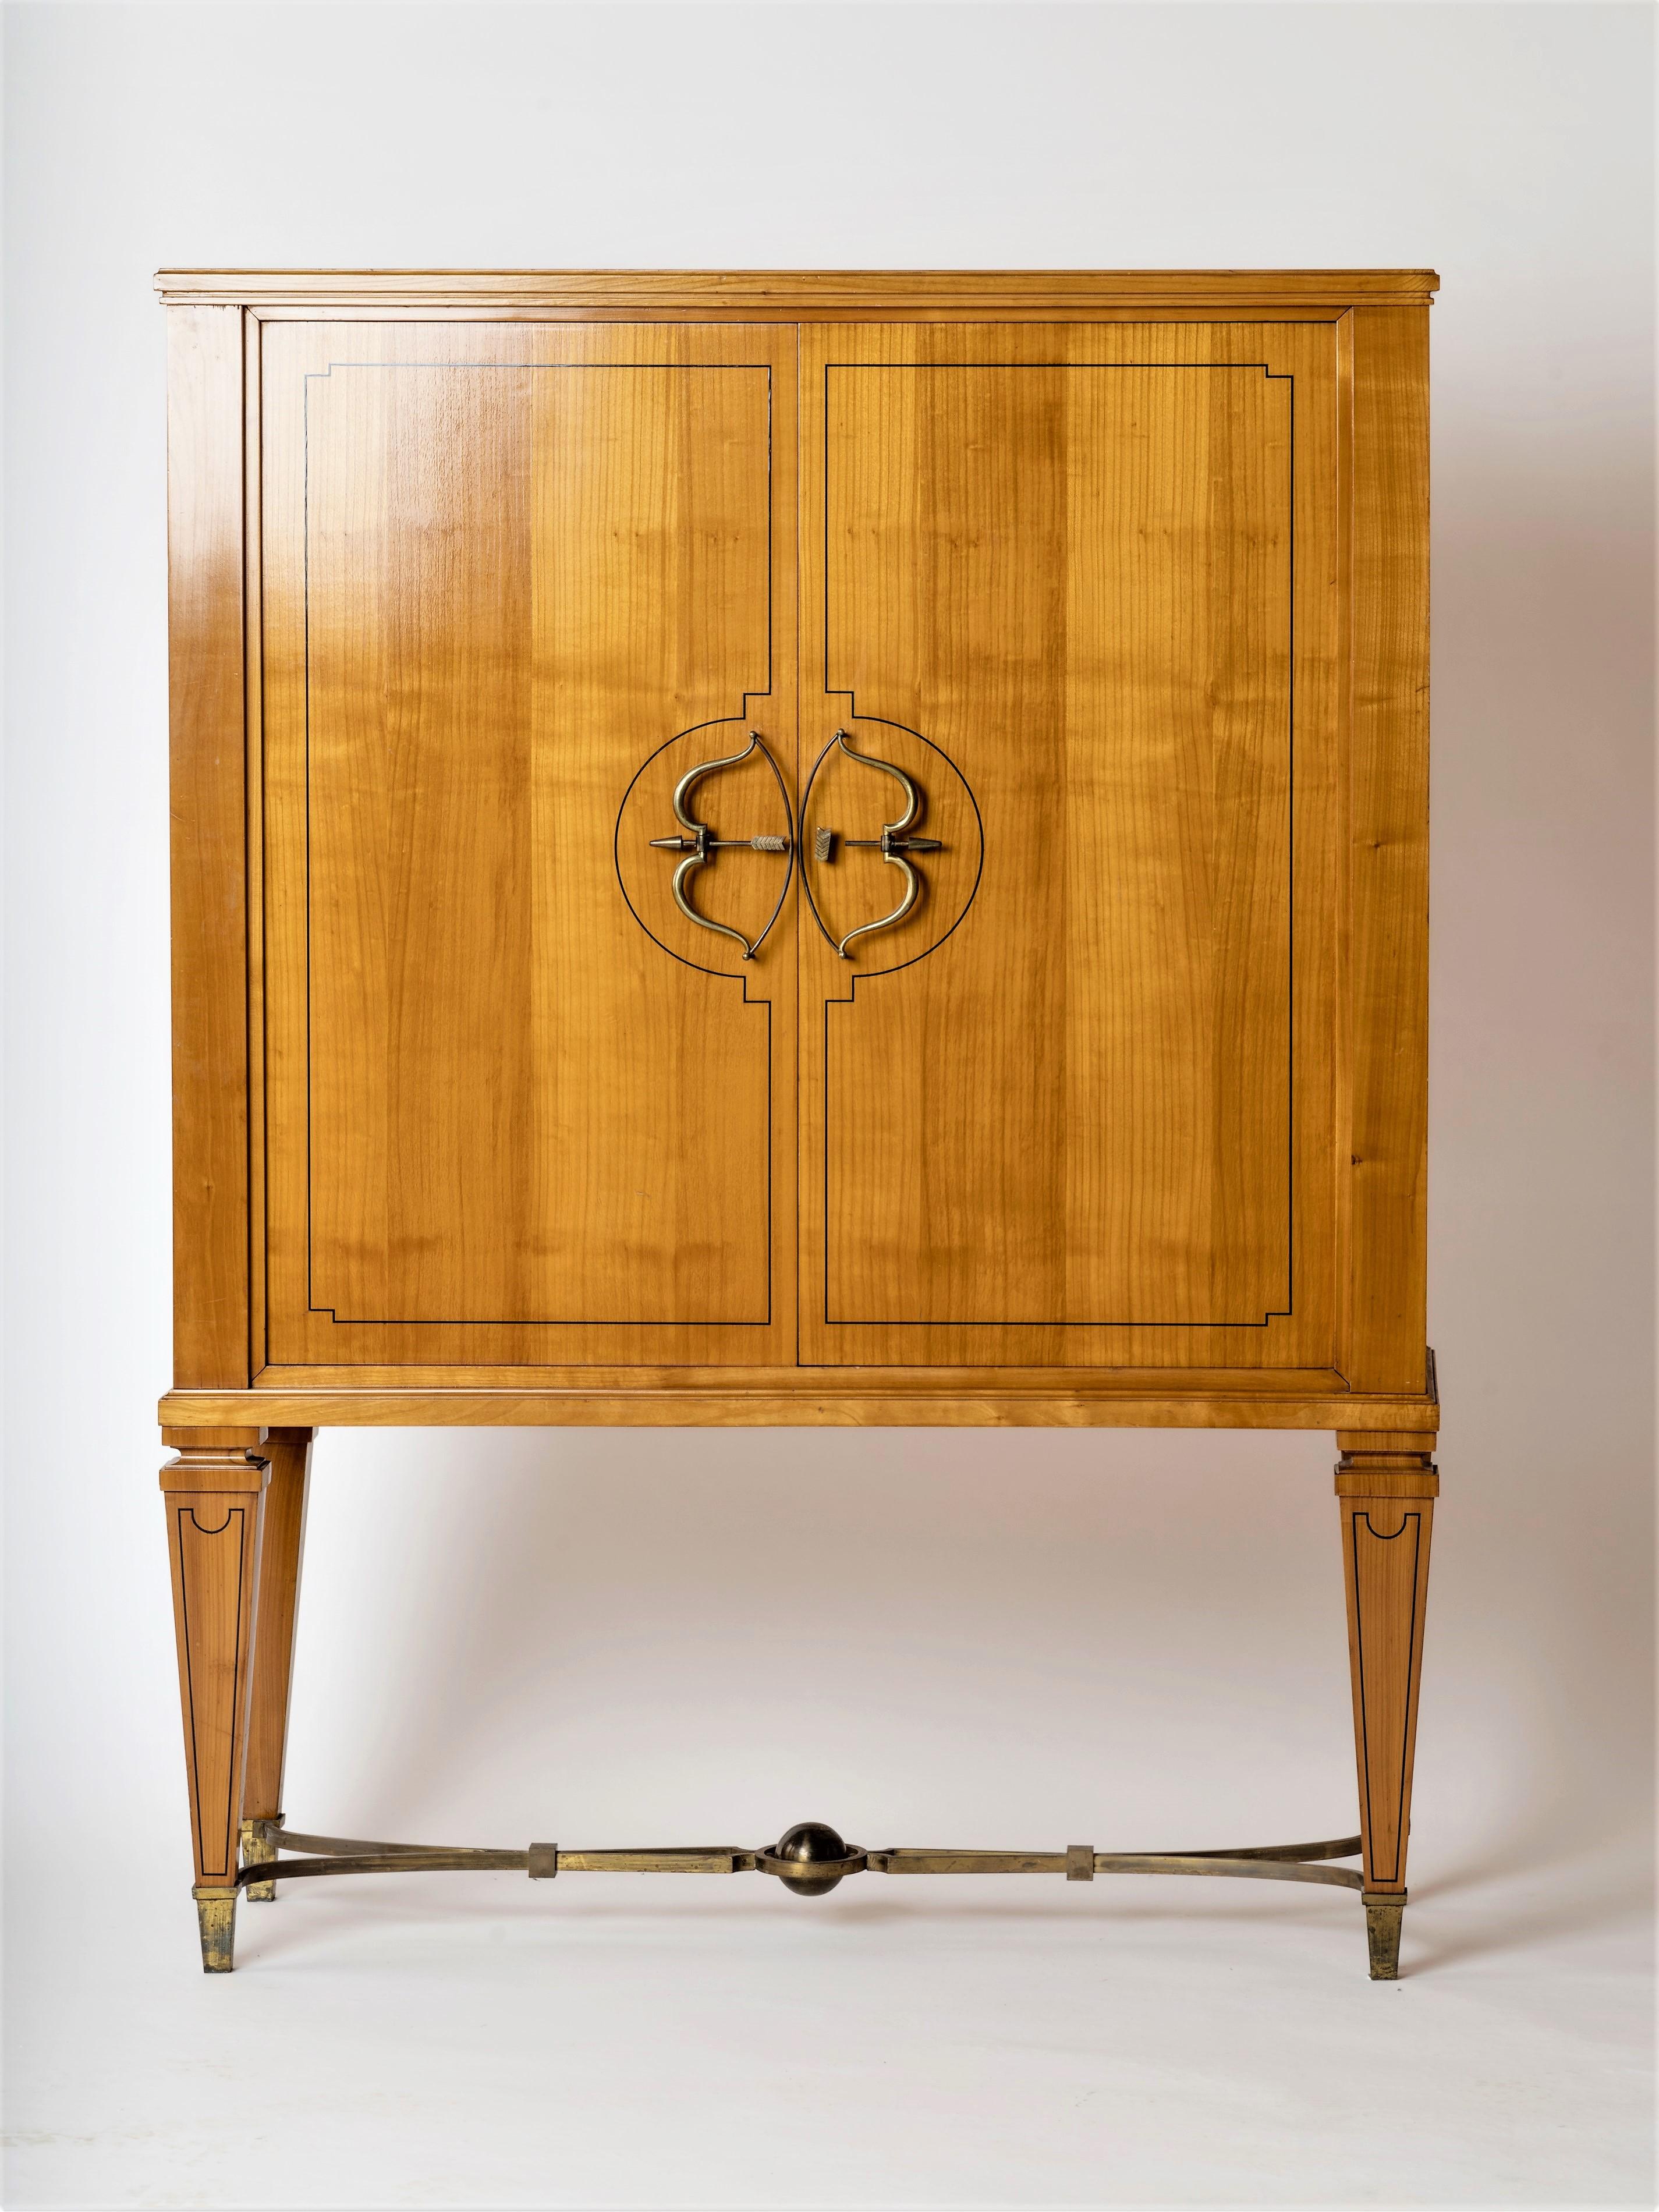 Signed unique high cabinet by Jansen. Bespoke order for Mme Landenauer avenue Henri Martin's home in Paris. Fruitwood veneer with darker 